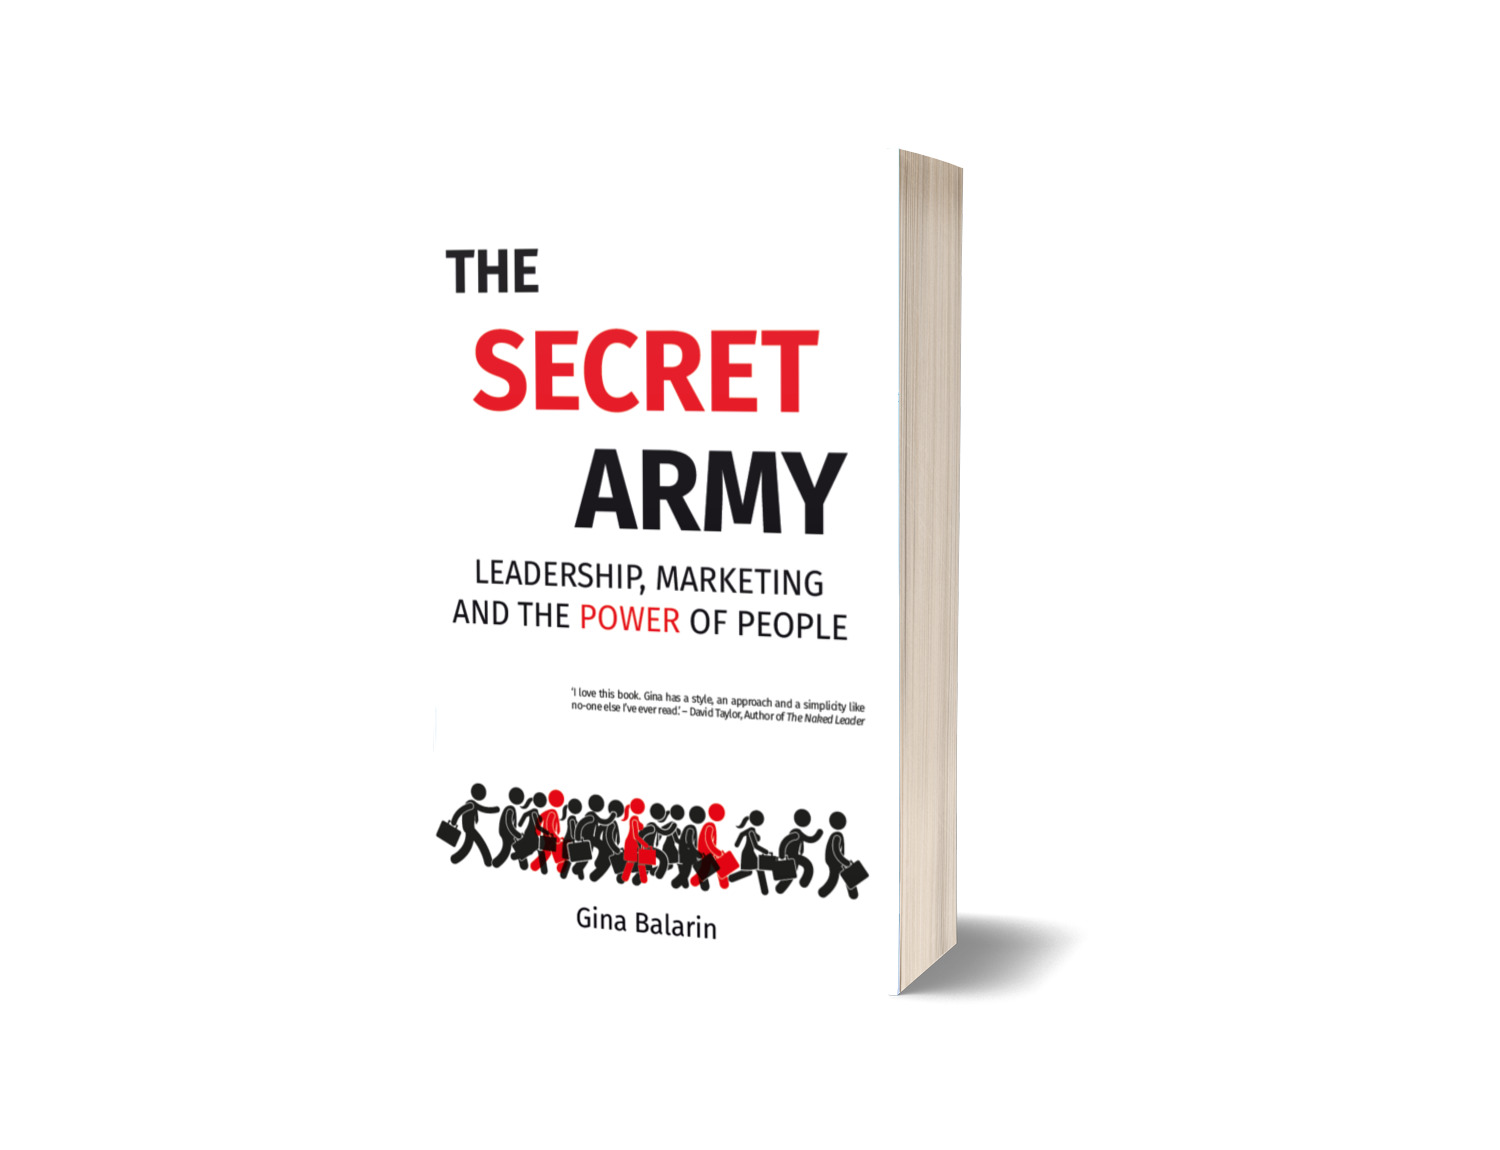 The book written by Gina Balarin entitled The Secret Army: Leadership, Marketing and the Power of People